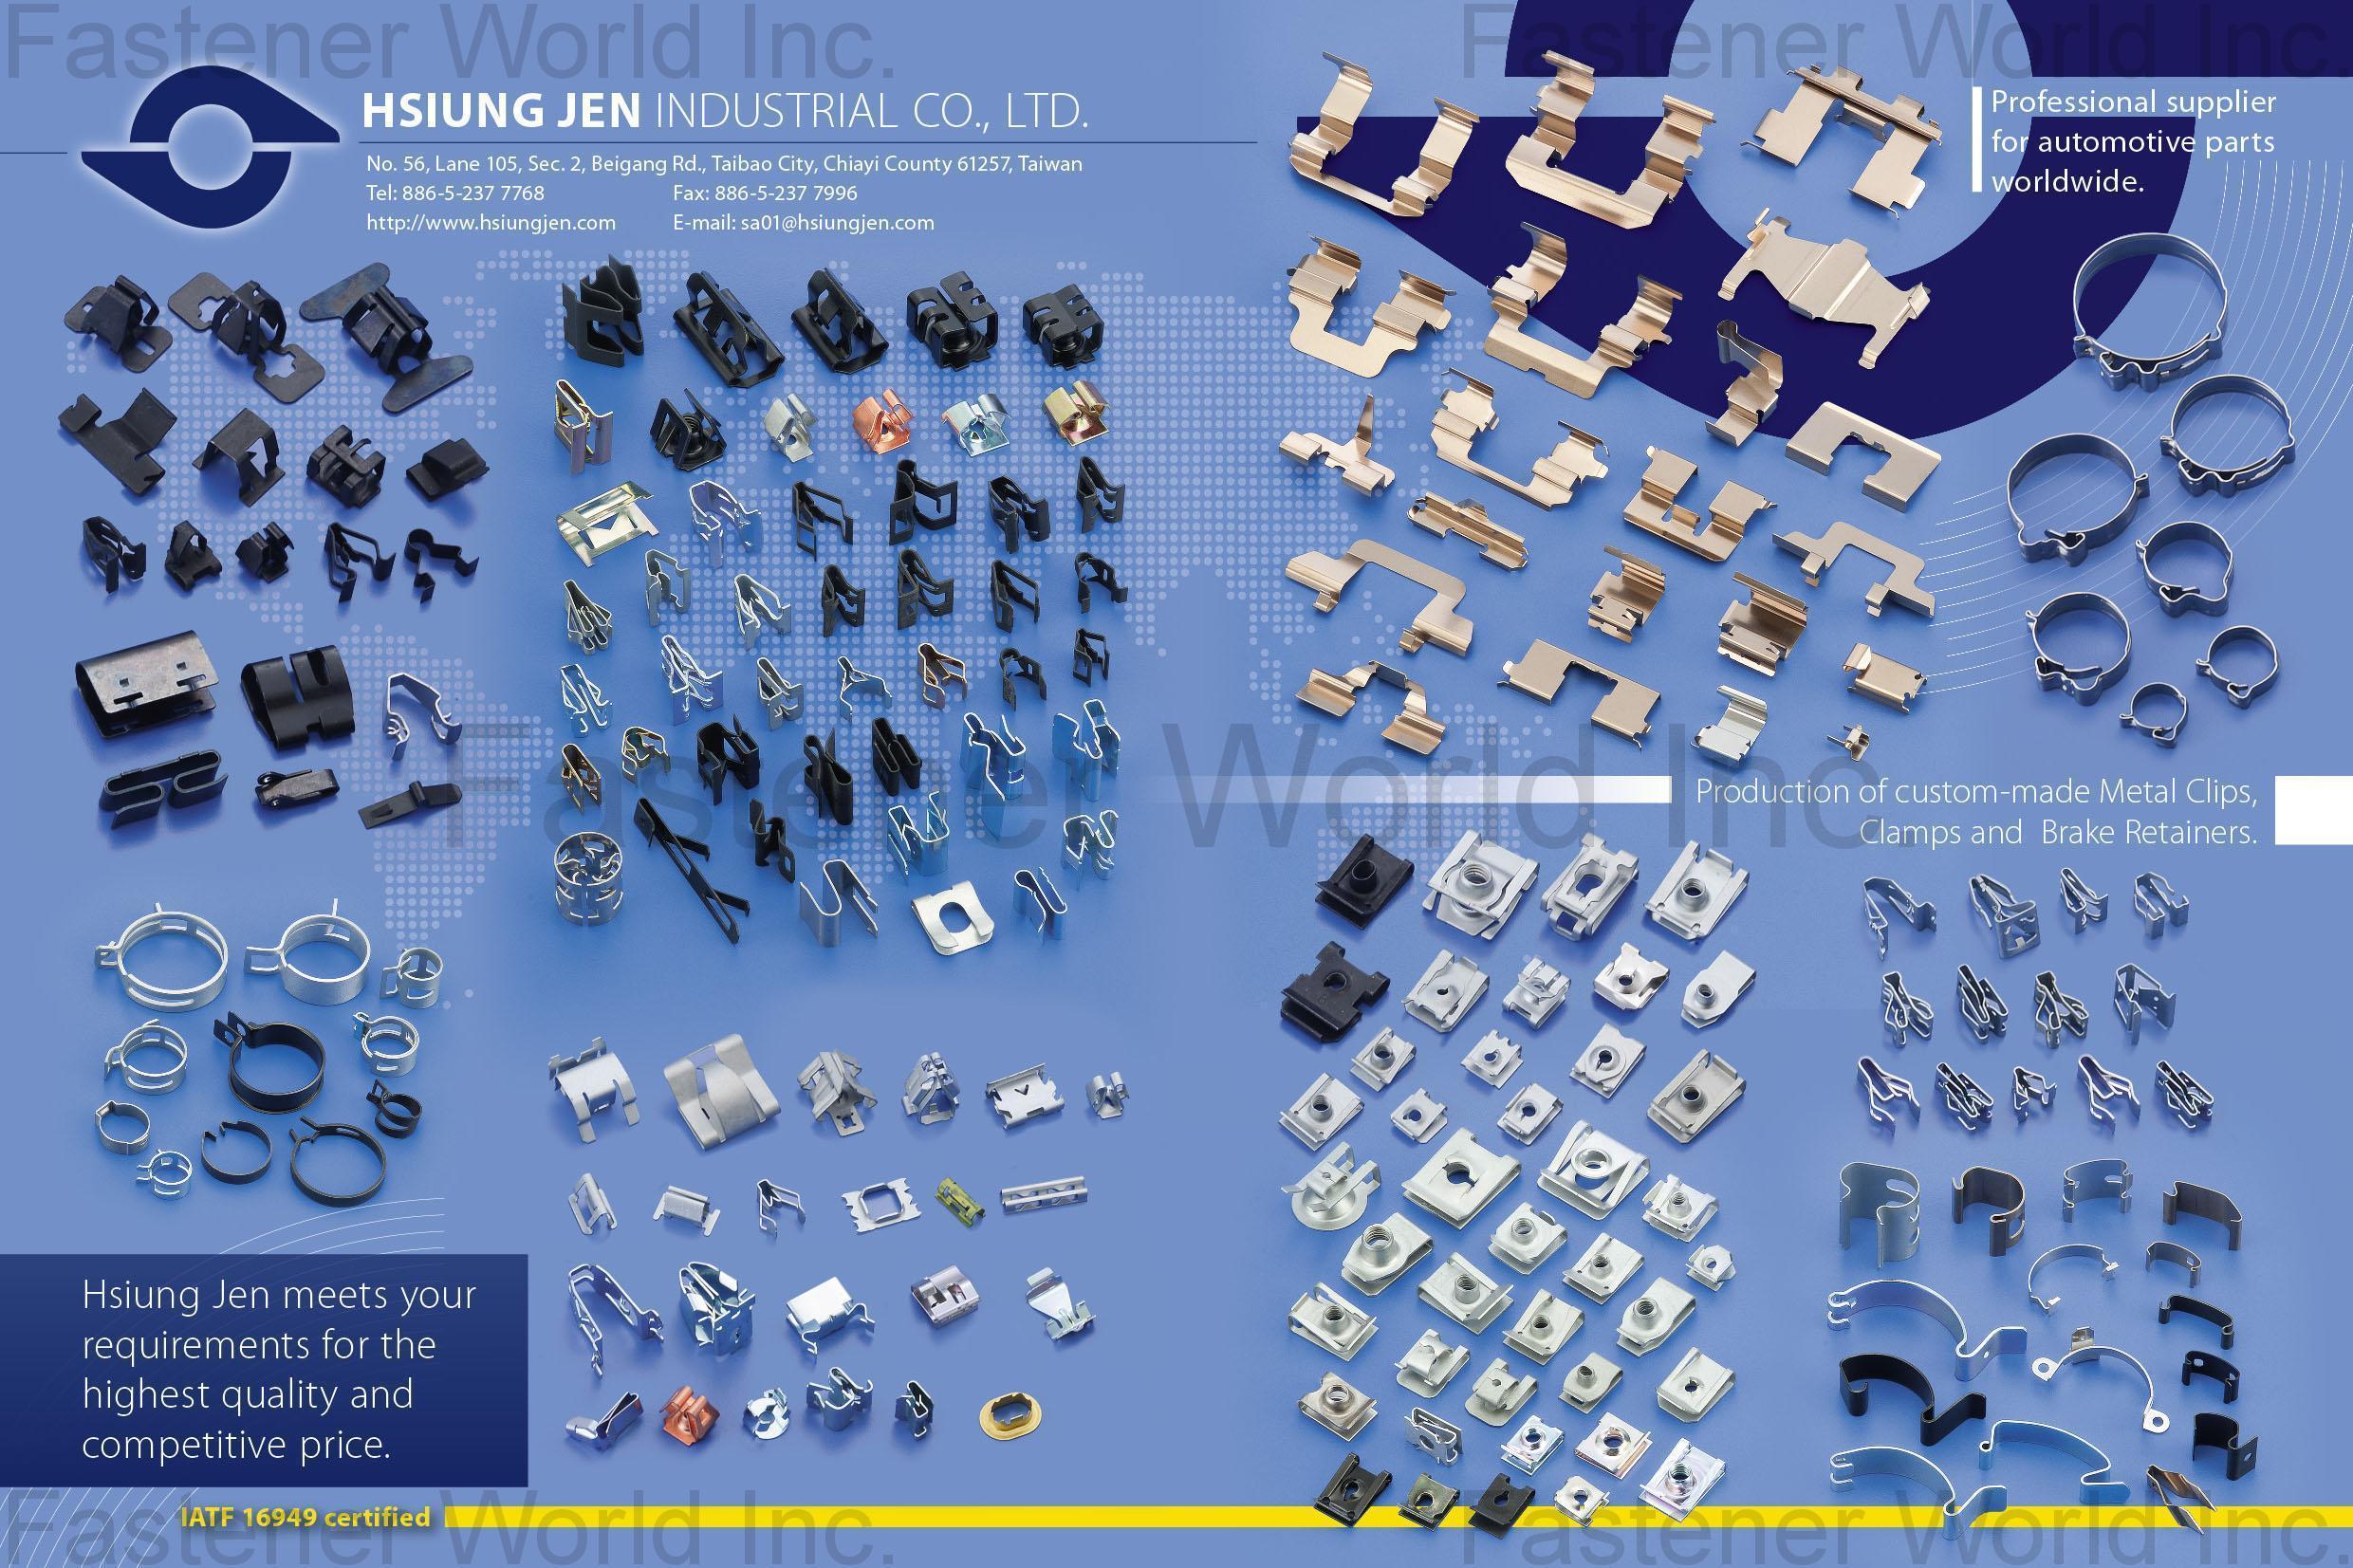 HSIUNG JEN INDUSTRIAL CO., LTD. , Automotive Parts, Metal Clips, Clamps, Brake Retainers , Sheet Metal Clamps